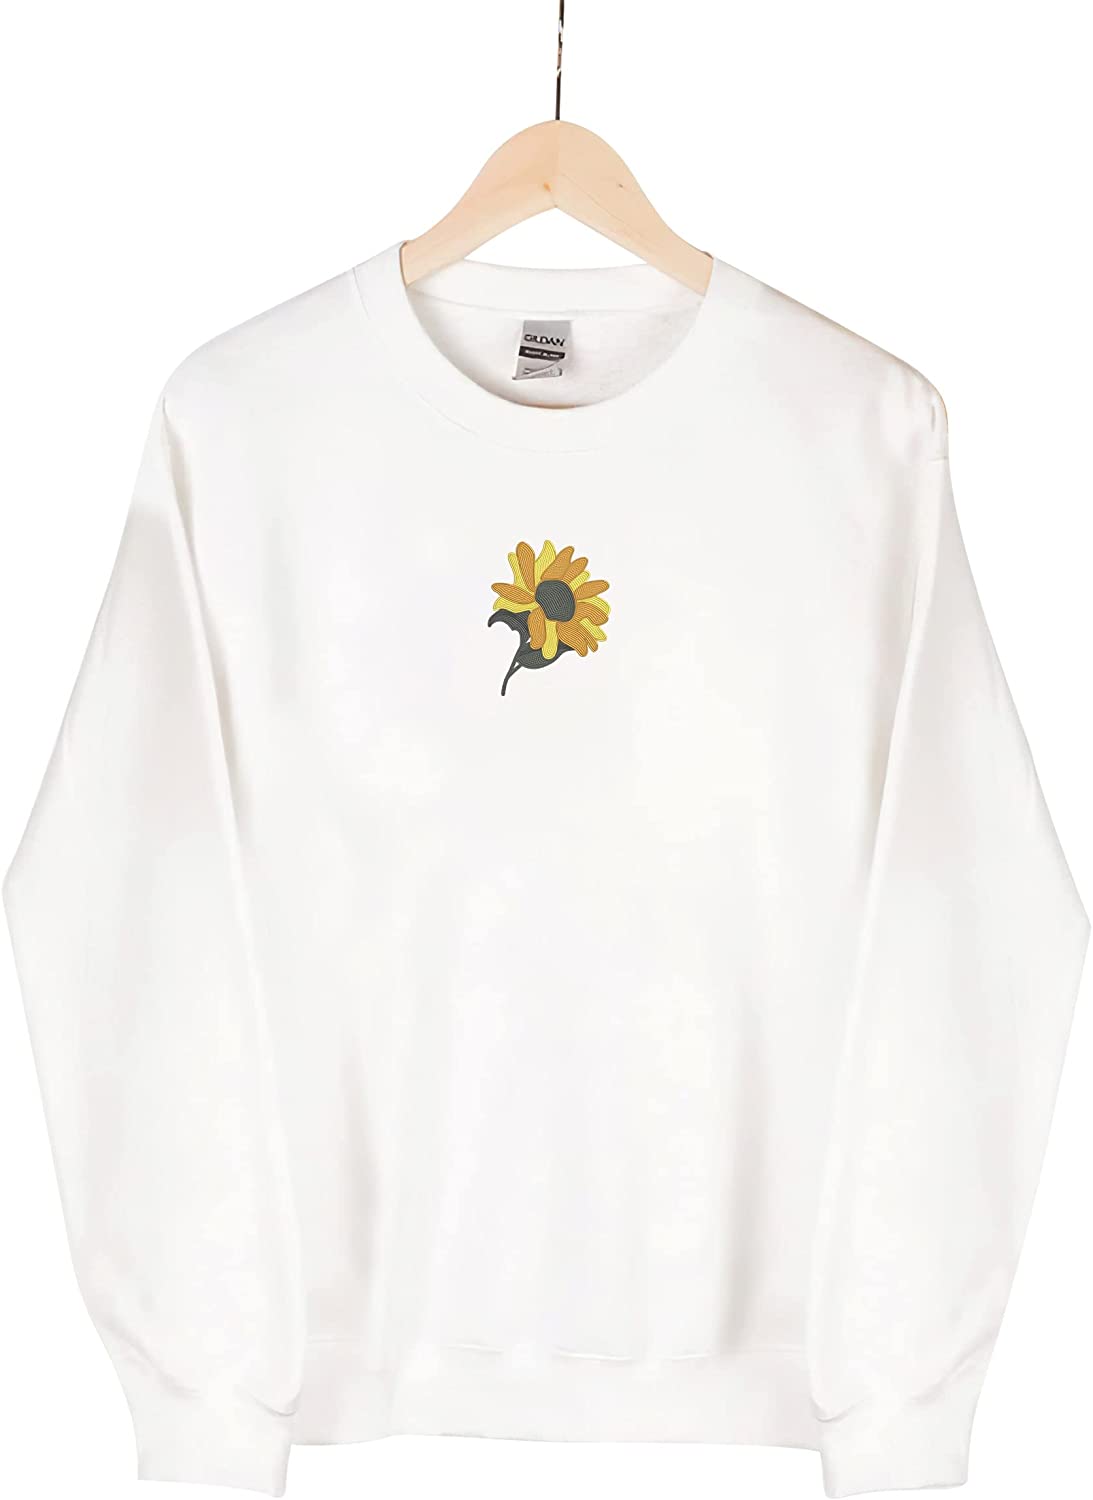 Embroly Women's Embroidered Sunflower Sweatshirt